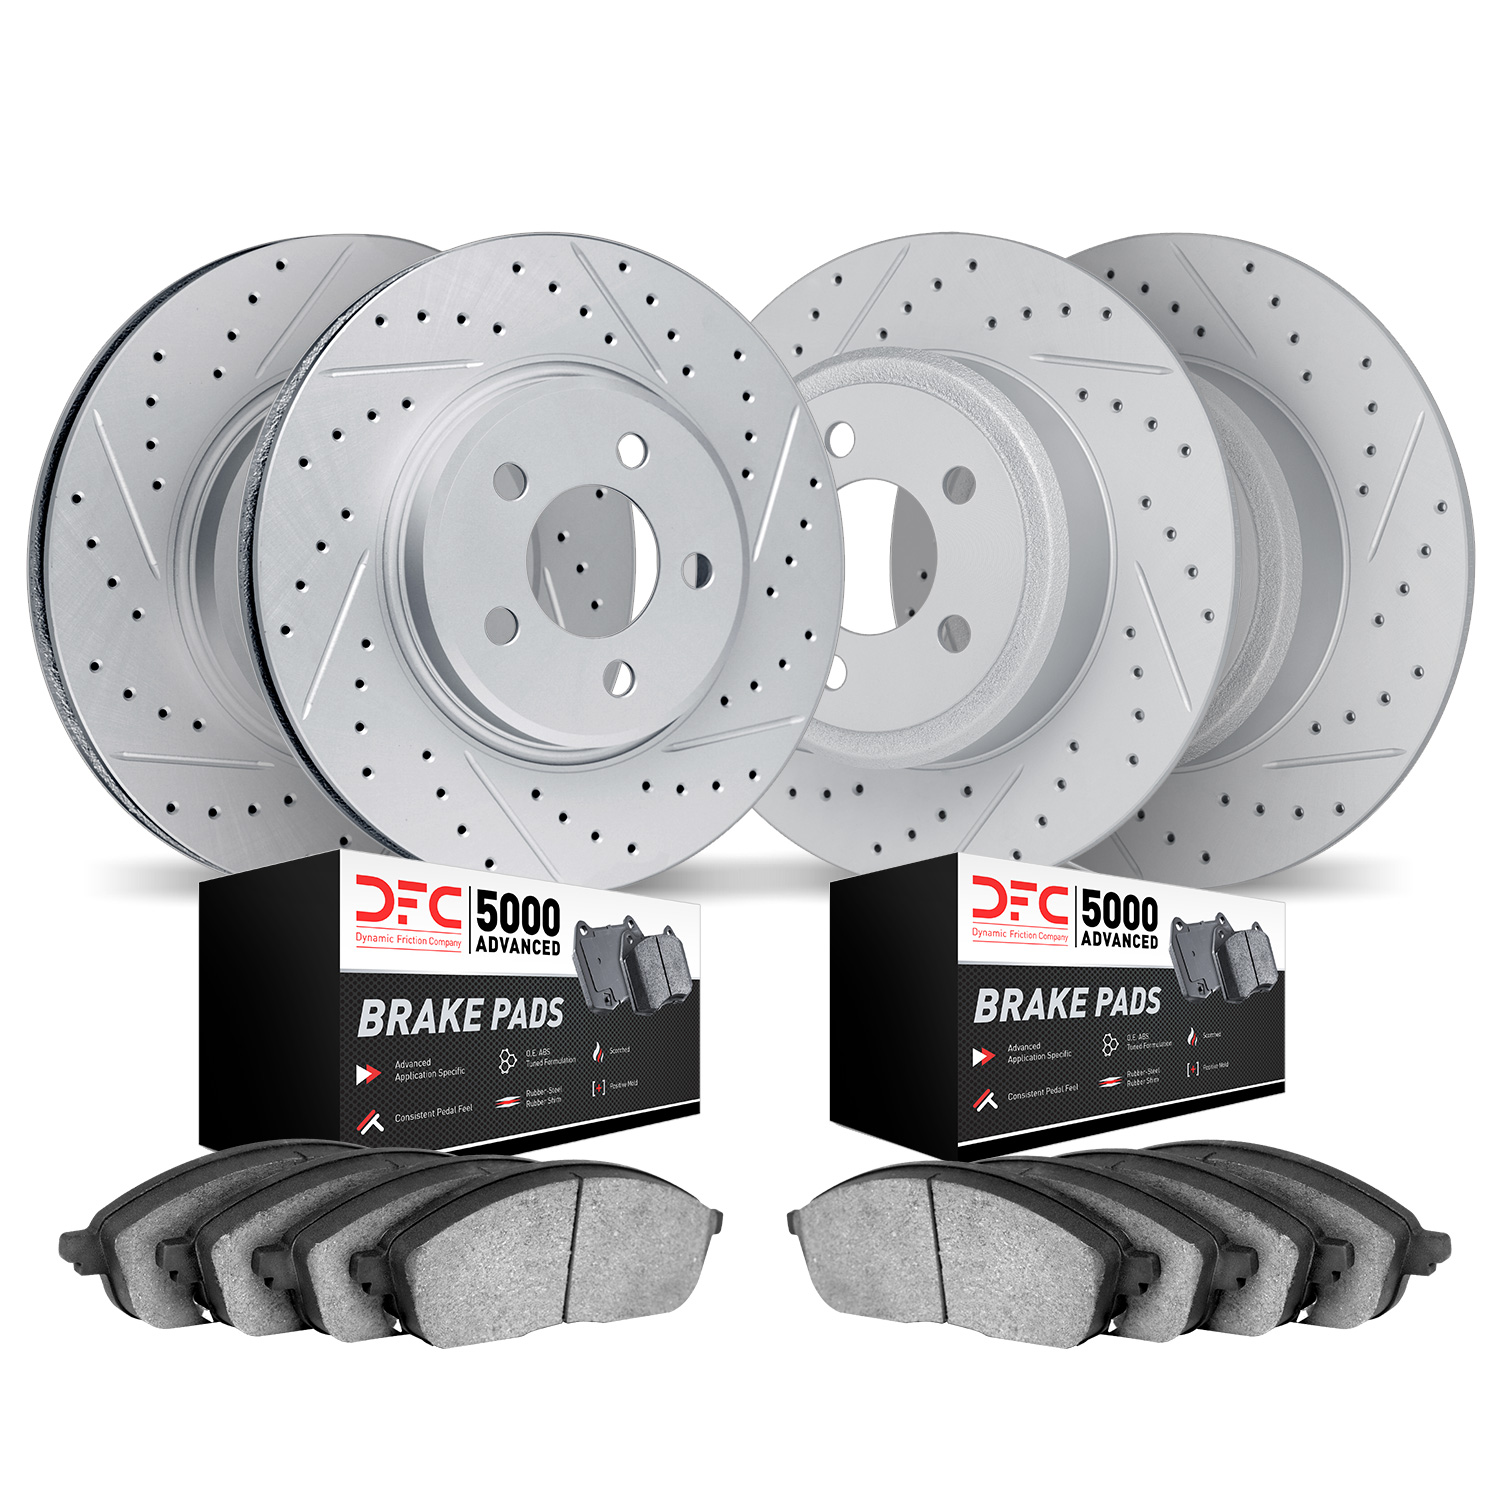 2504-54193 Geoperformance Drilled/Slotted Rotors w/5000 Advanced Brake Pads Kit, 1993-1995 Ford/Lincoln/Mercury/Mazda, Position: